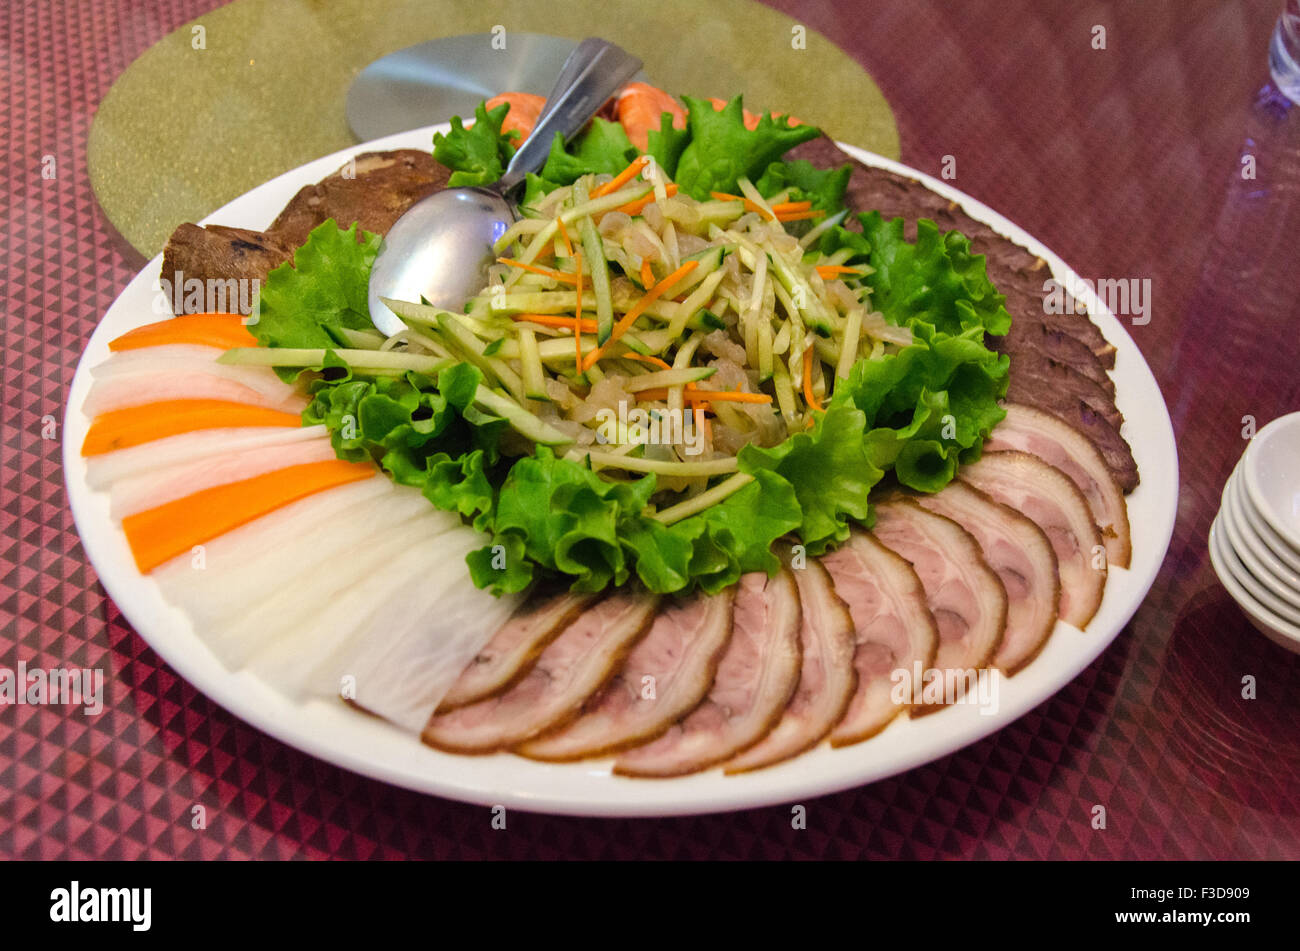 Plate of chinese salad with jellyfish, beef, pork, and vegetables Stock Photo